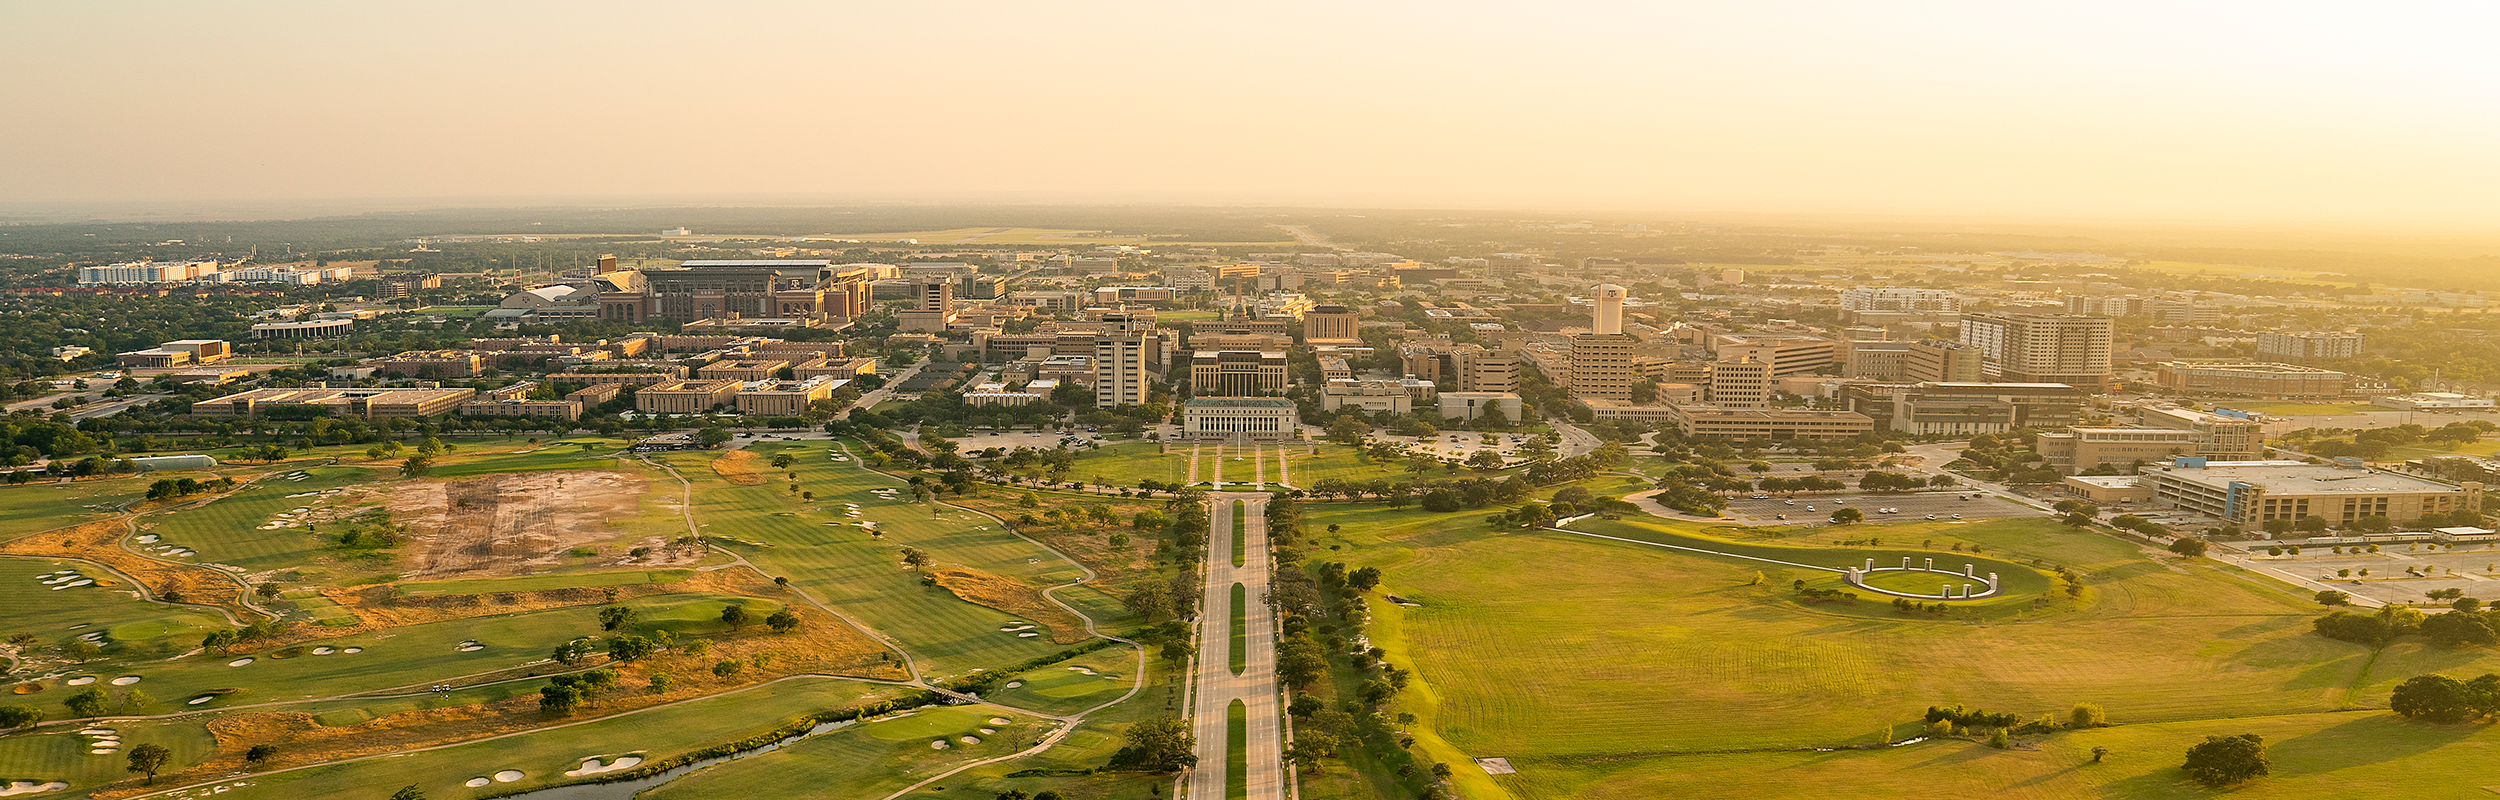 Aerial view of Texas A&M Campus